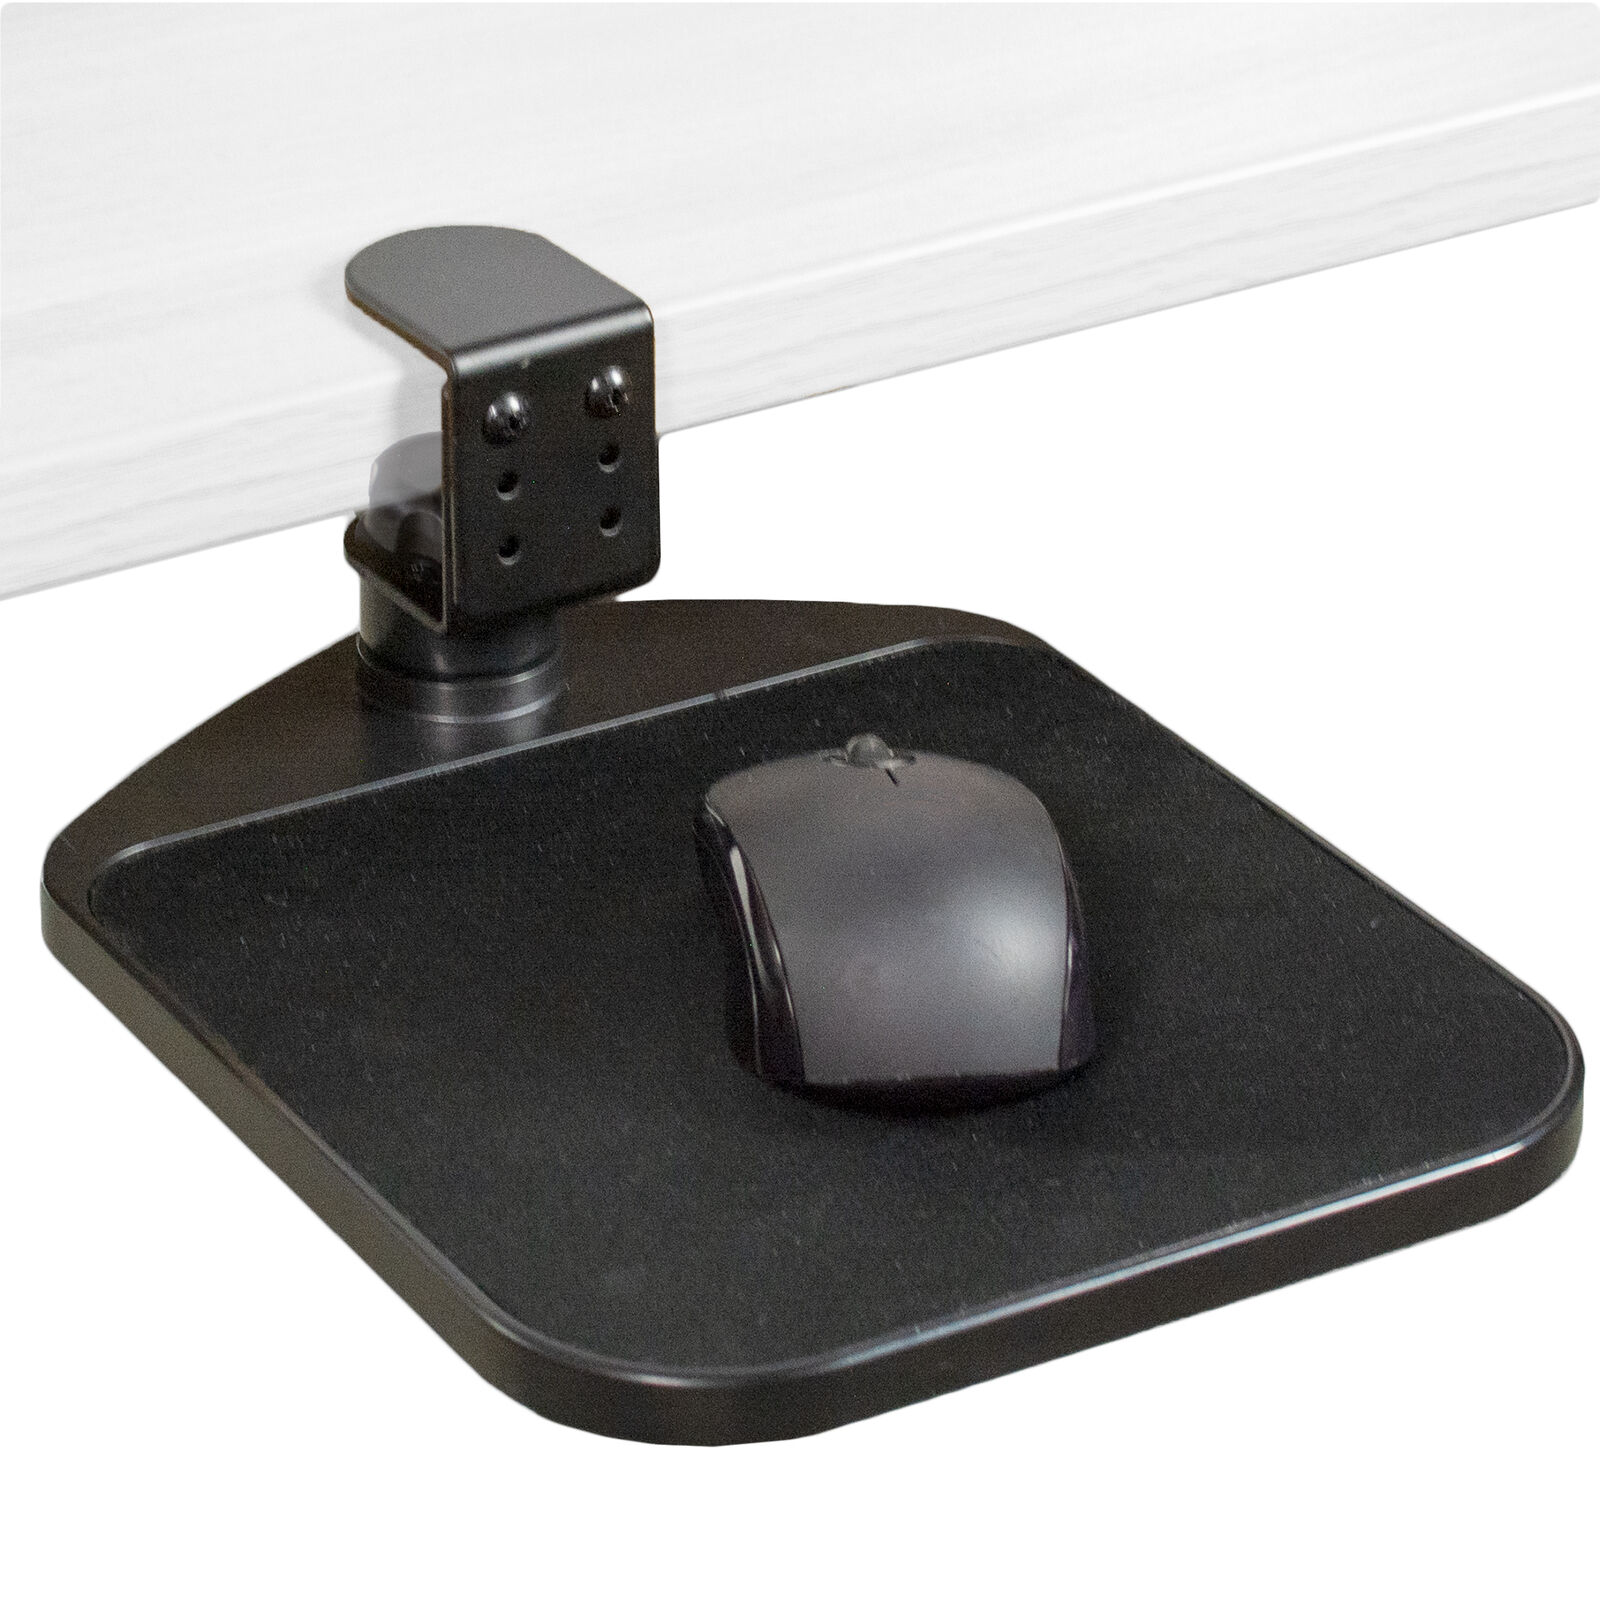 VIVO Black Rotating Desk Clamp Adjustable Computer Mouse Pad and Device Holder